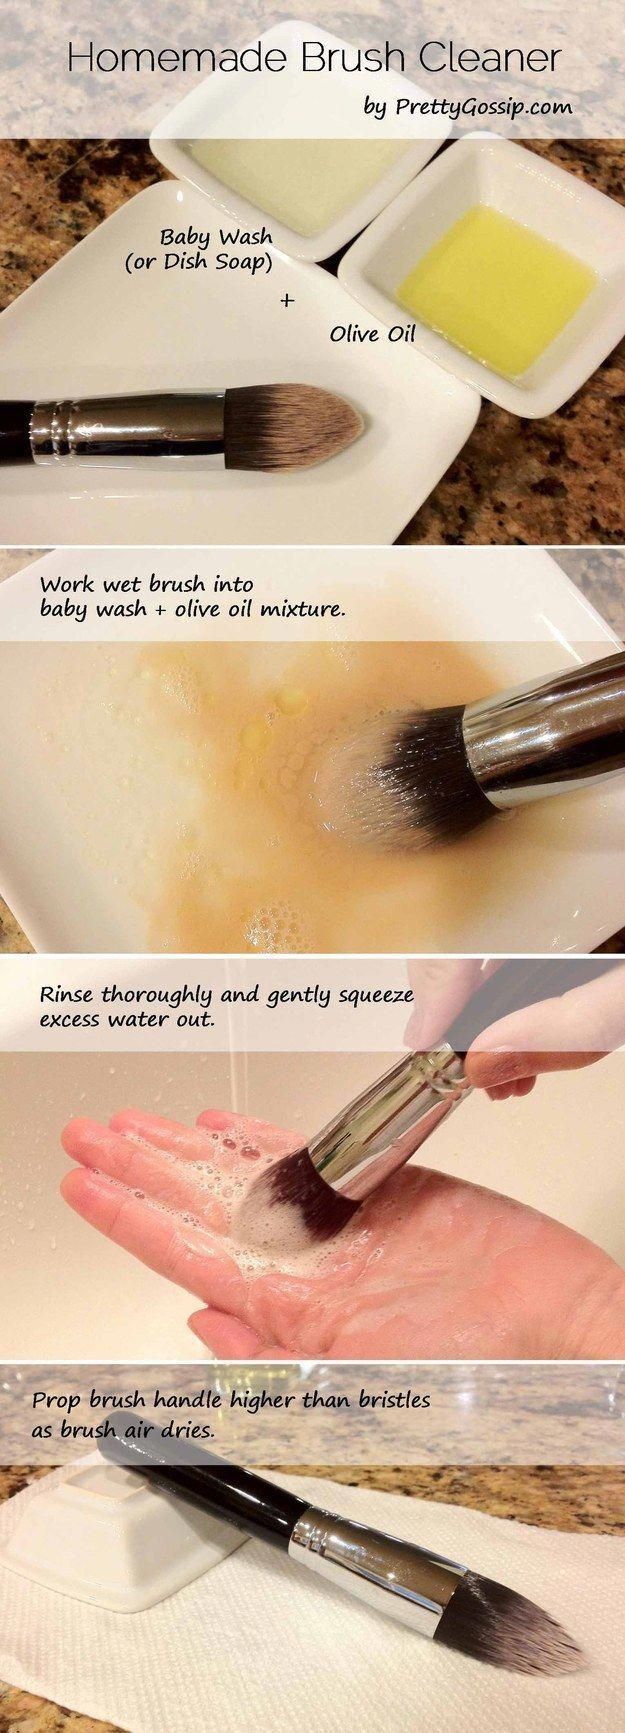 17 Satisfying Ways To Clean Everything In Your Makeup Bag - 17 Satisfying Ways To Clean Everything In Your Makeup Bag -   16 diy Makeup eyeliner ideas